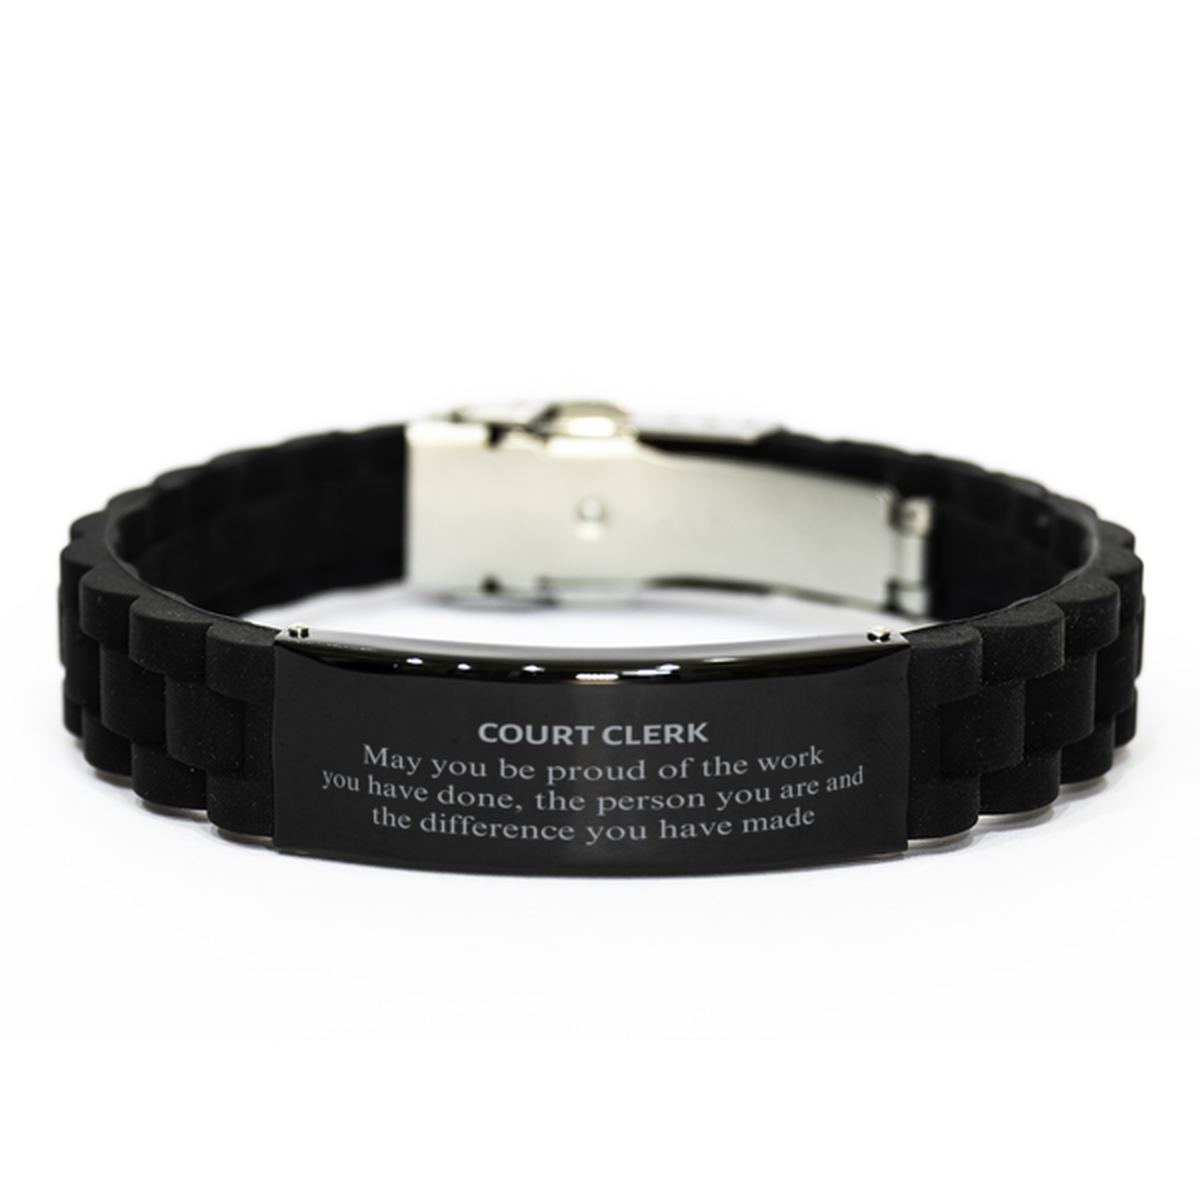 Court Clerk May you be proud of the work you have done, Retirement Court Clerk Black Glidelock Clasp Bracelet for Colleague Appreciation Gifts Amazing for Court Clerk